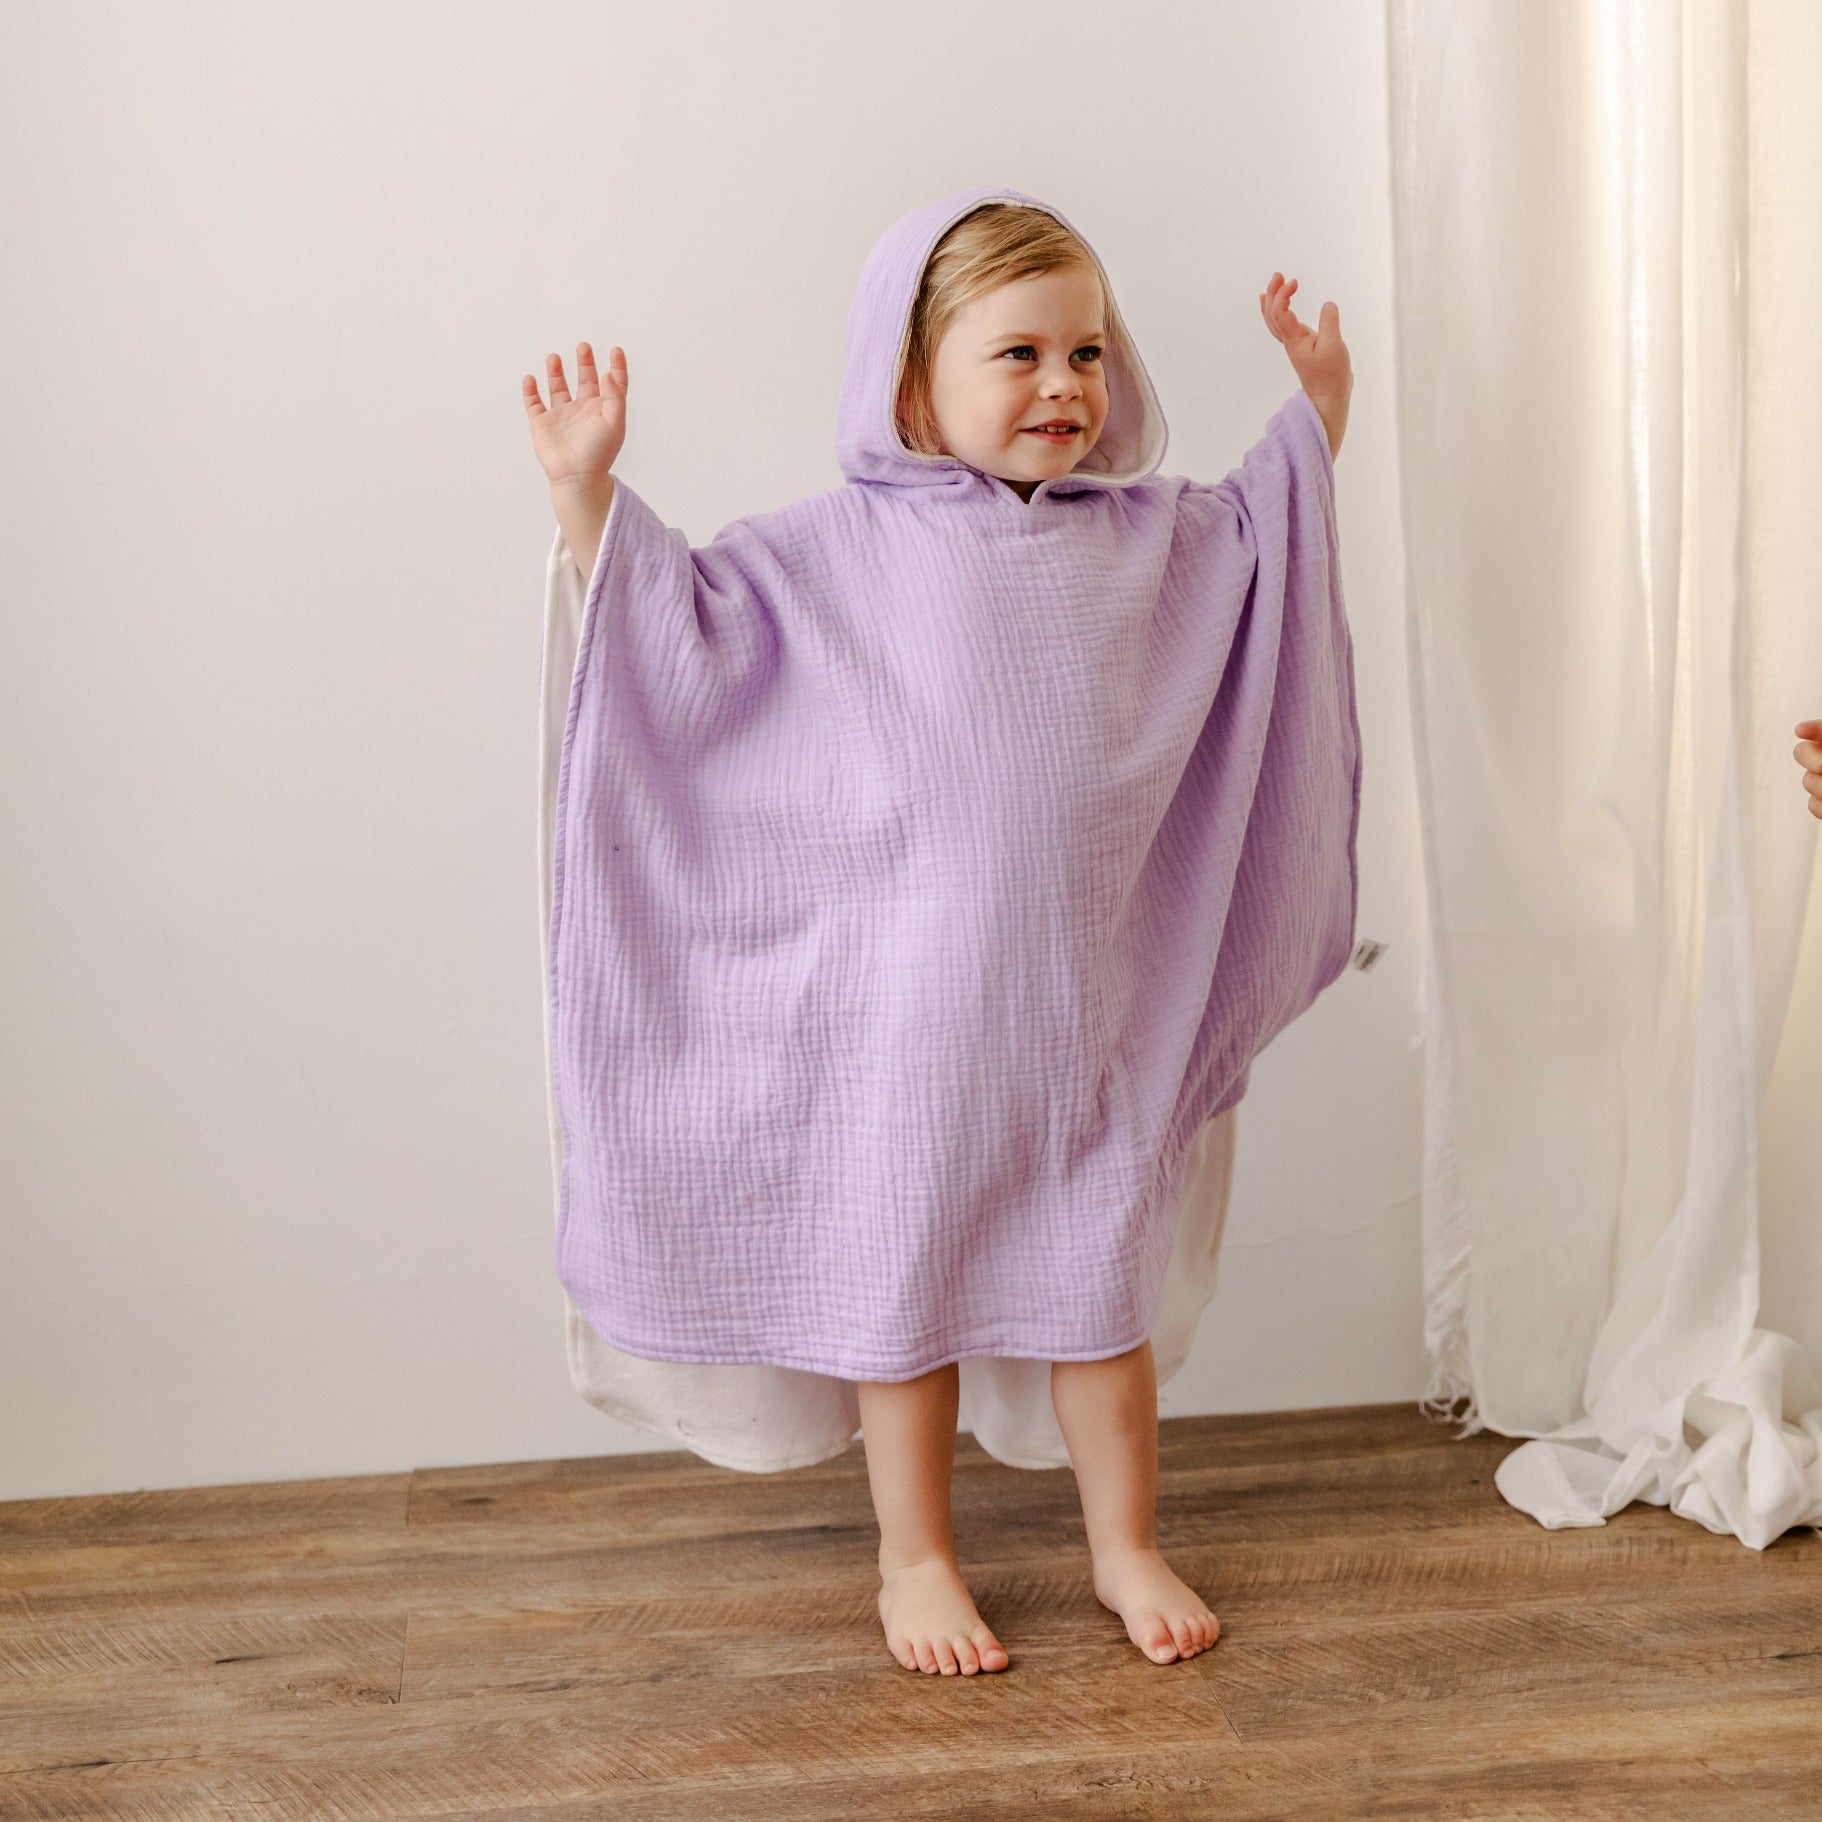 Hello Poppet Poncho | Organic Cotton Hooded Towel available at Bear & Moo